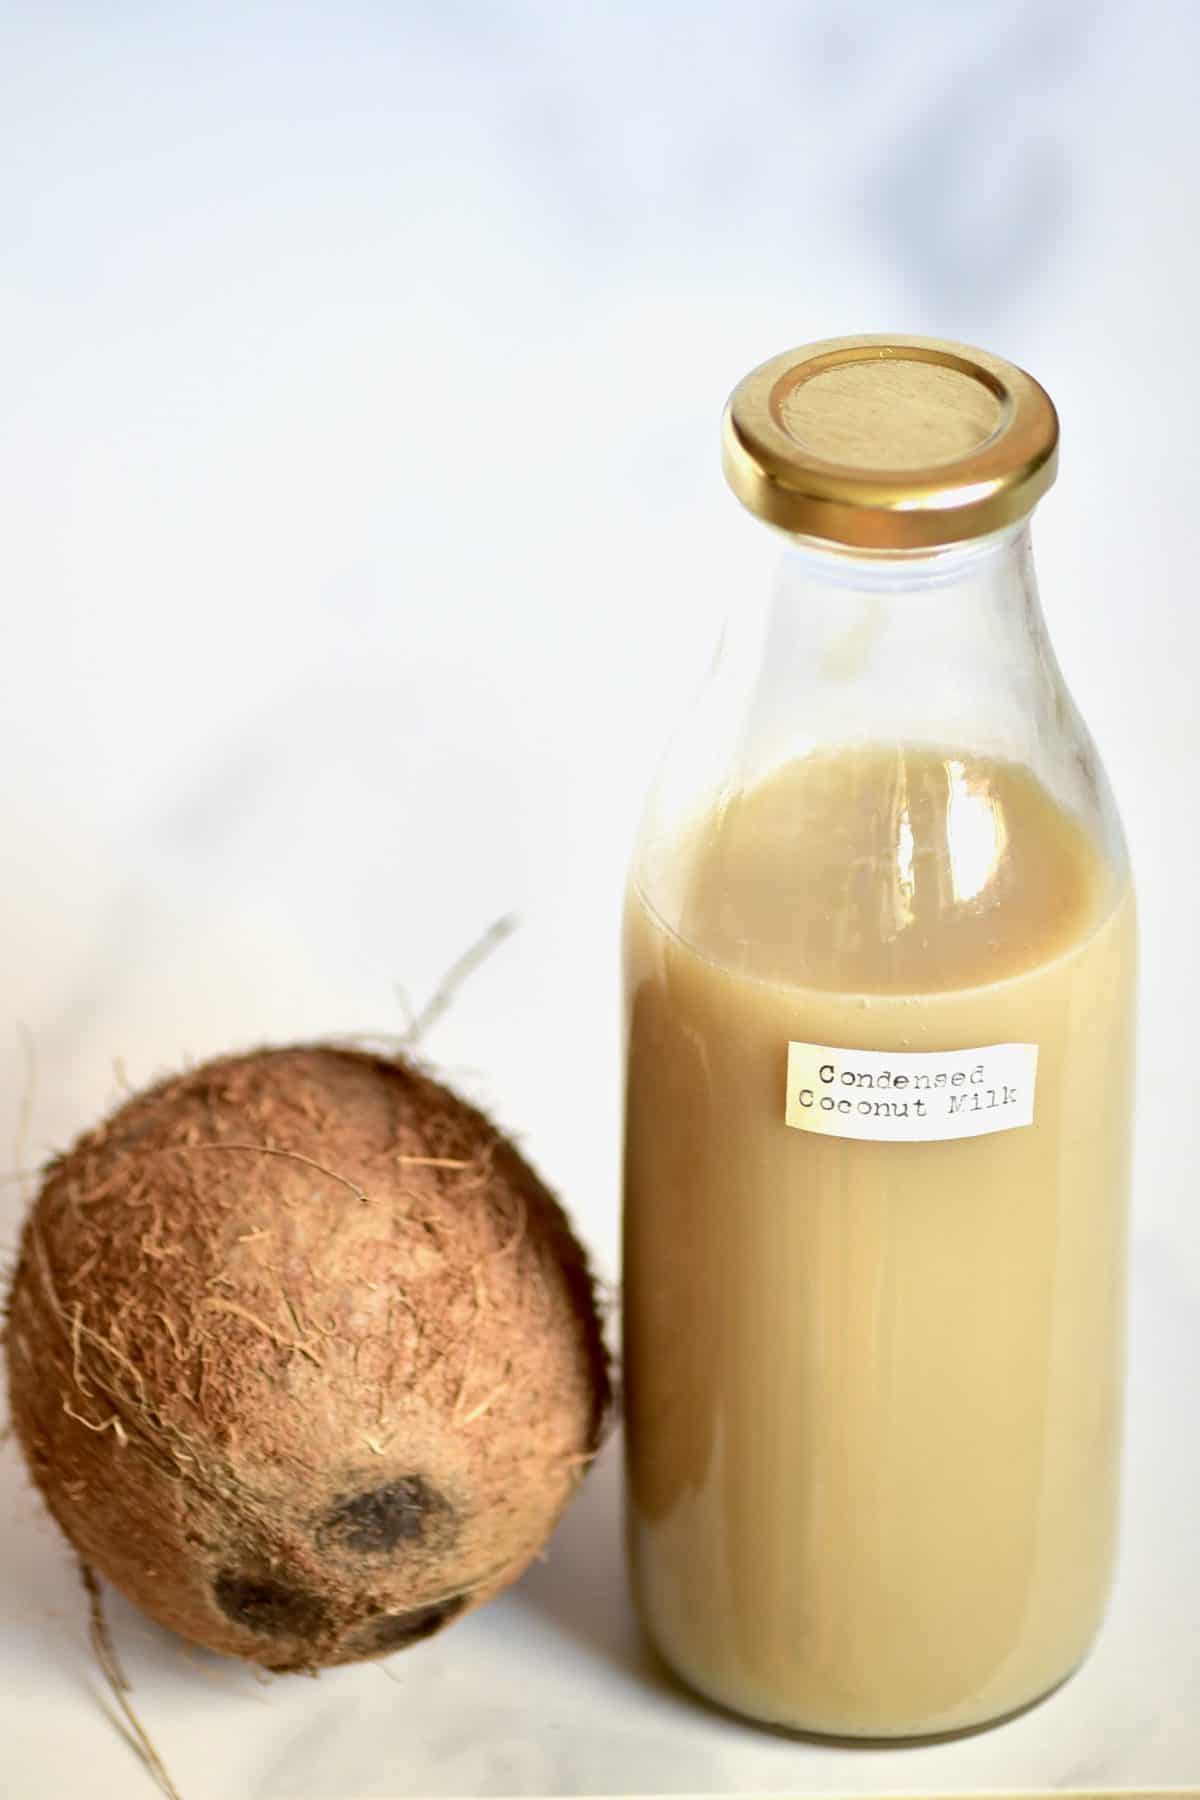 A bottle of condensed coconut milk and a coconut